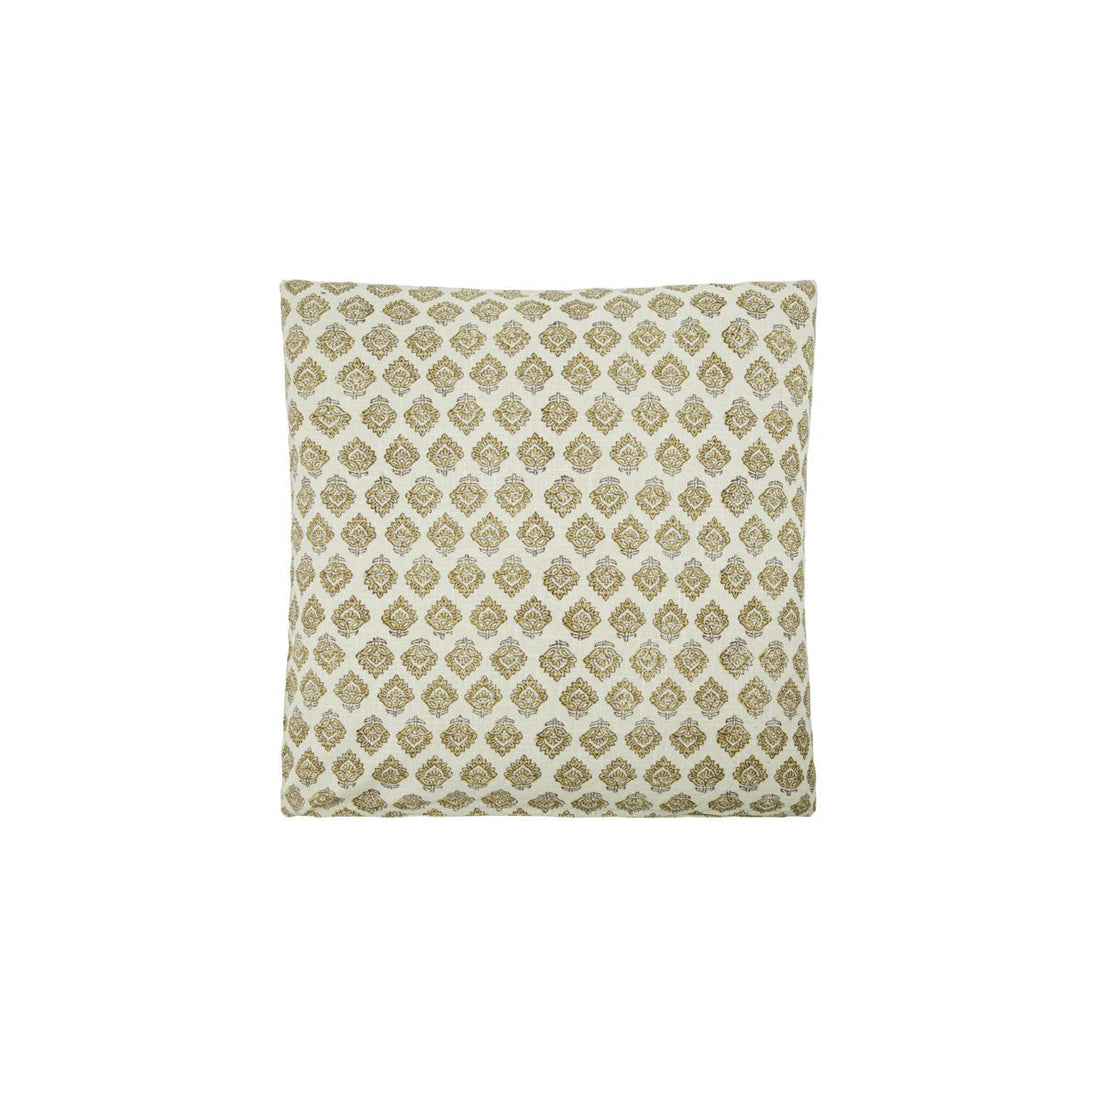 House Doctor Pillow Covers, Hdsaba, Beige